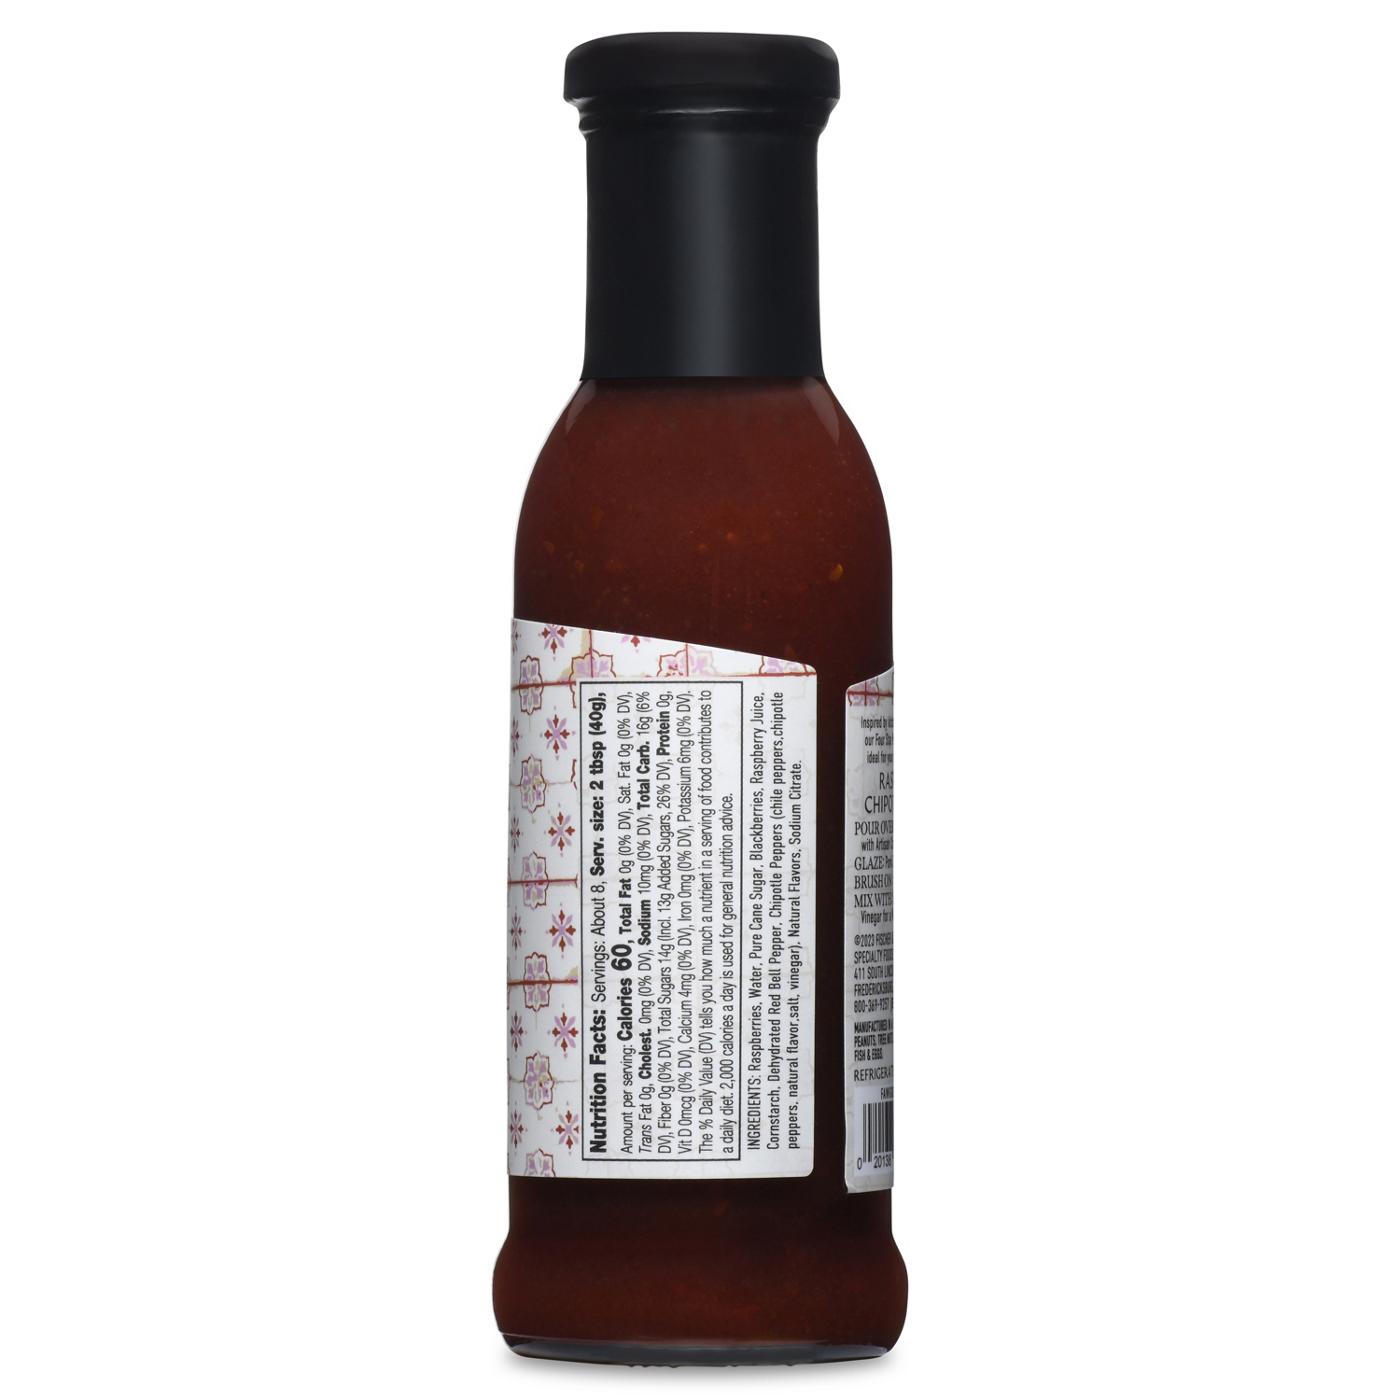 Fischer & Wieser Four Star Provisions Raspberry Chipotle Sauce; image 2 of 3